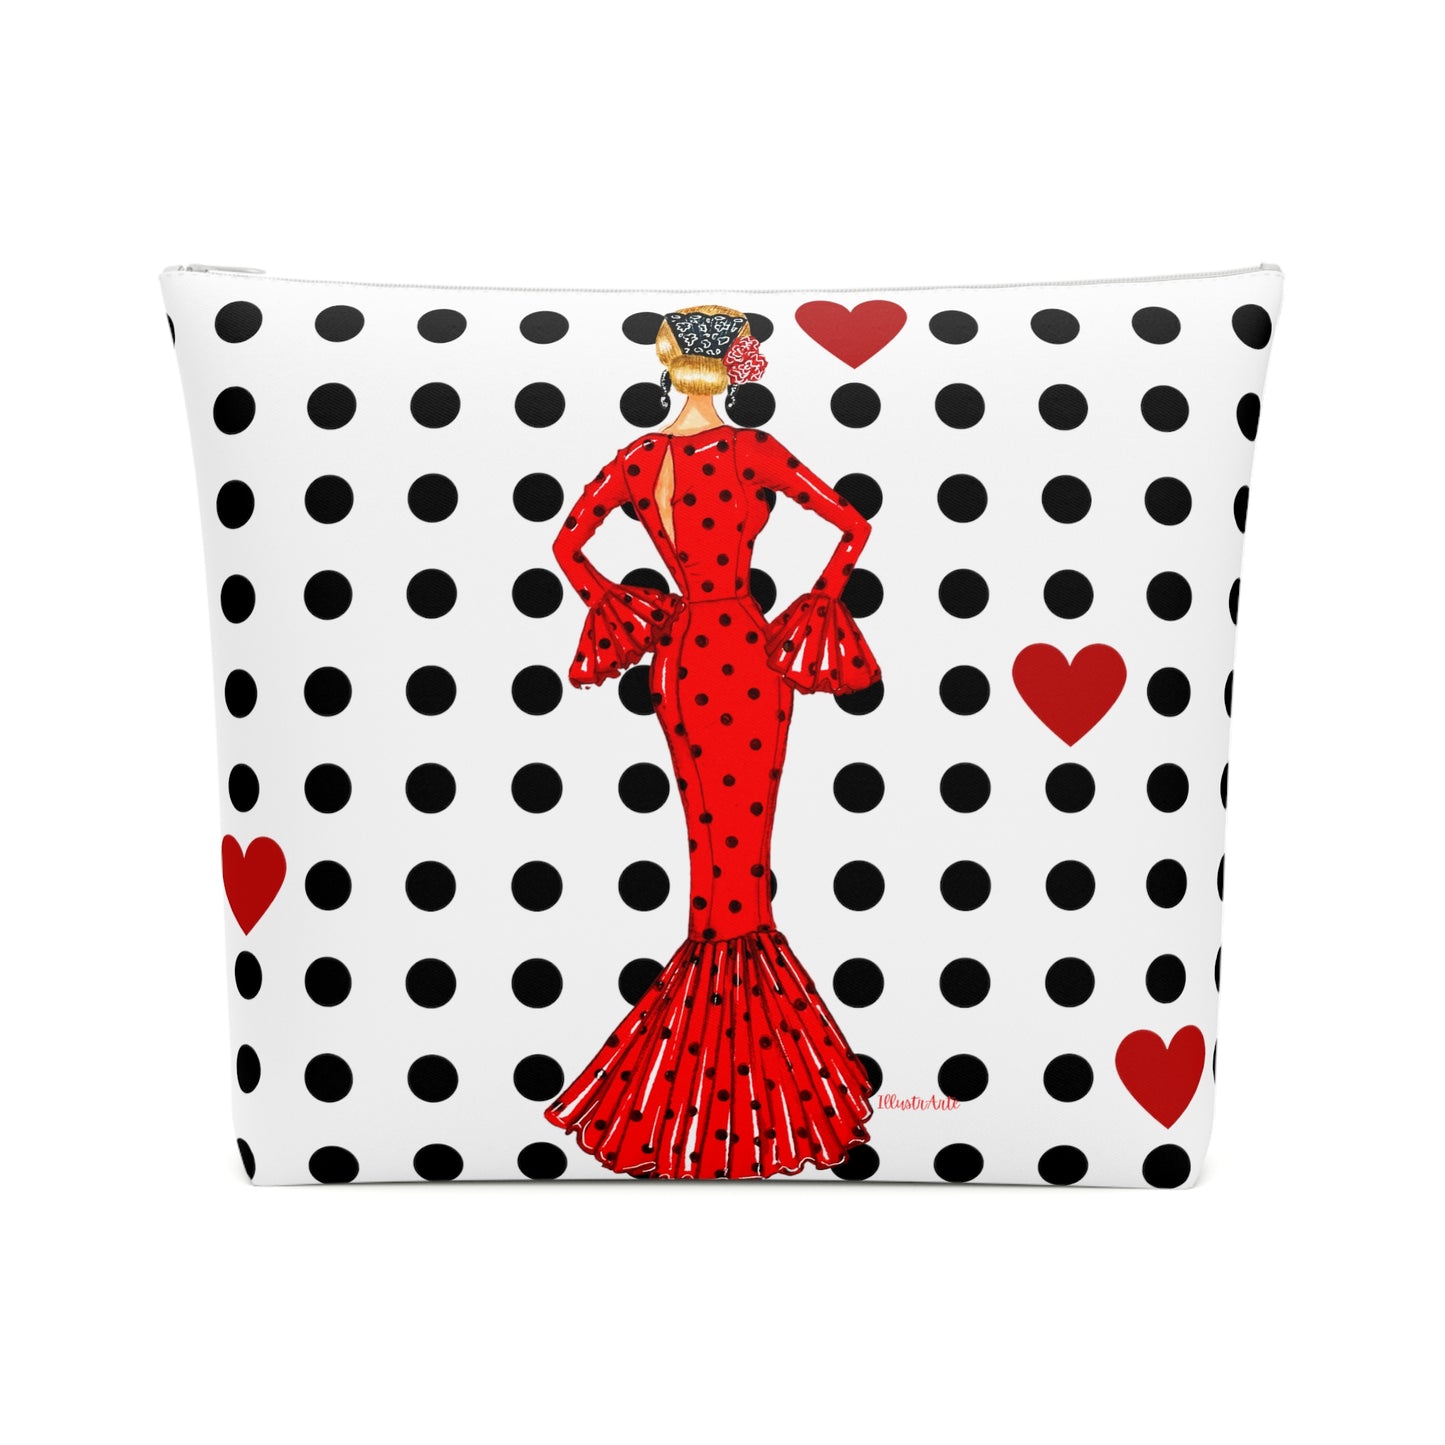 a polka dot purse with a woman in a red dress